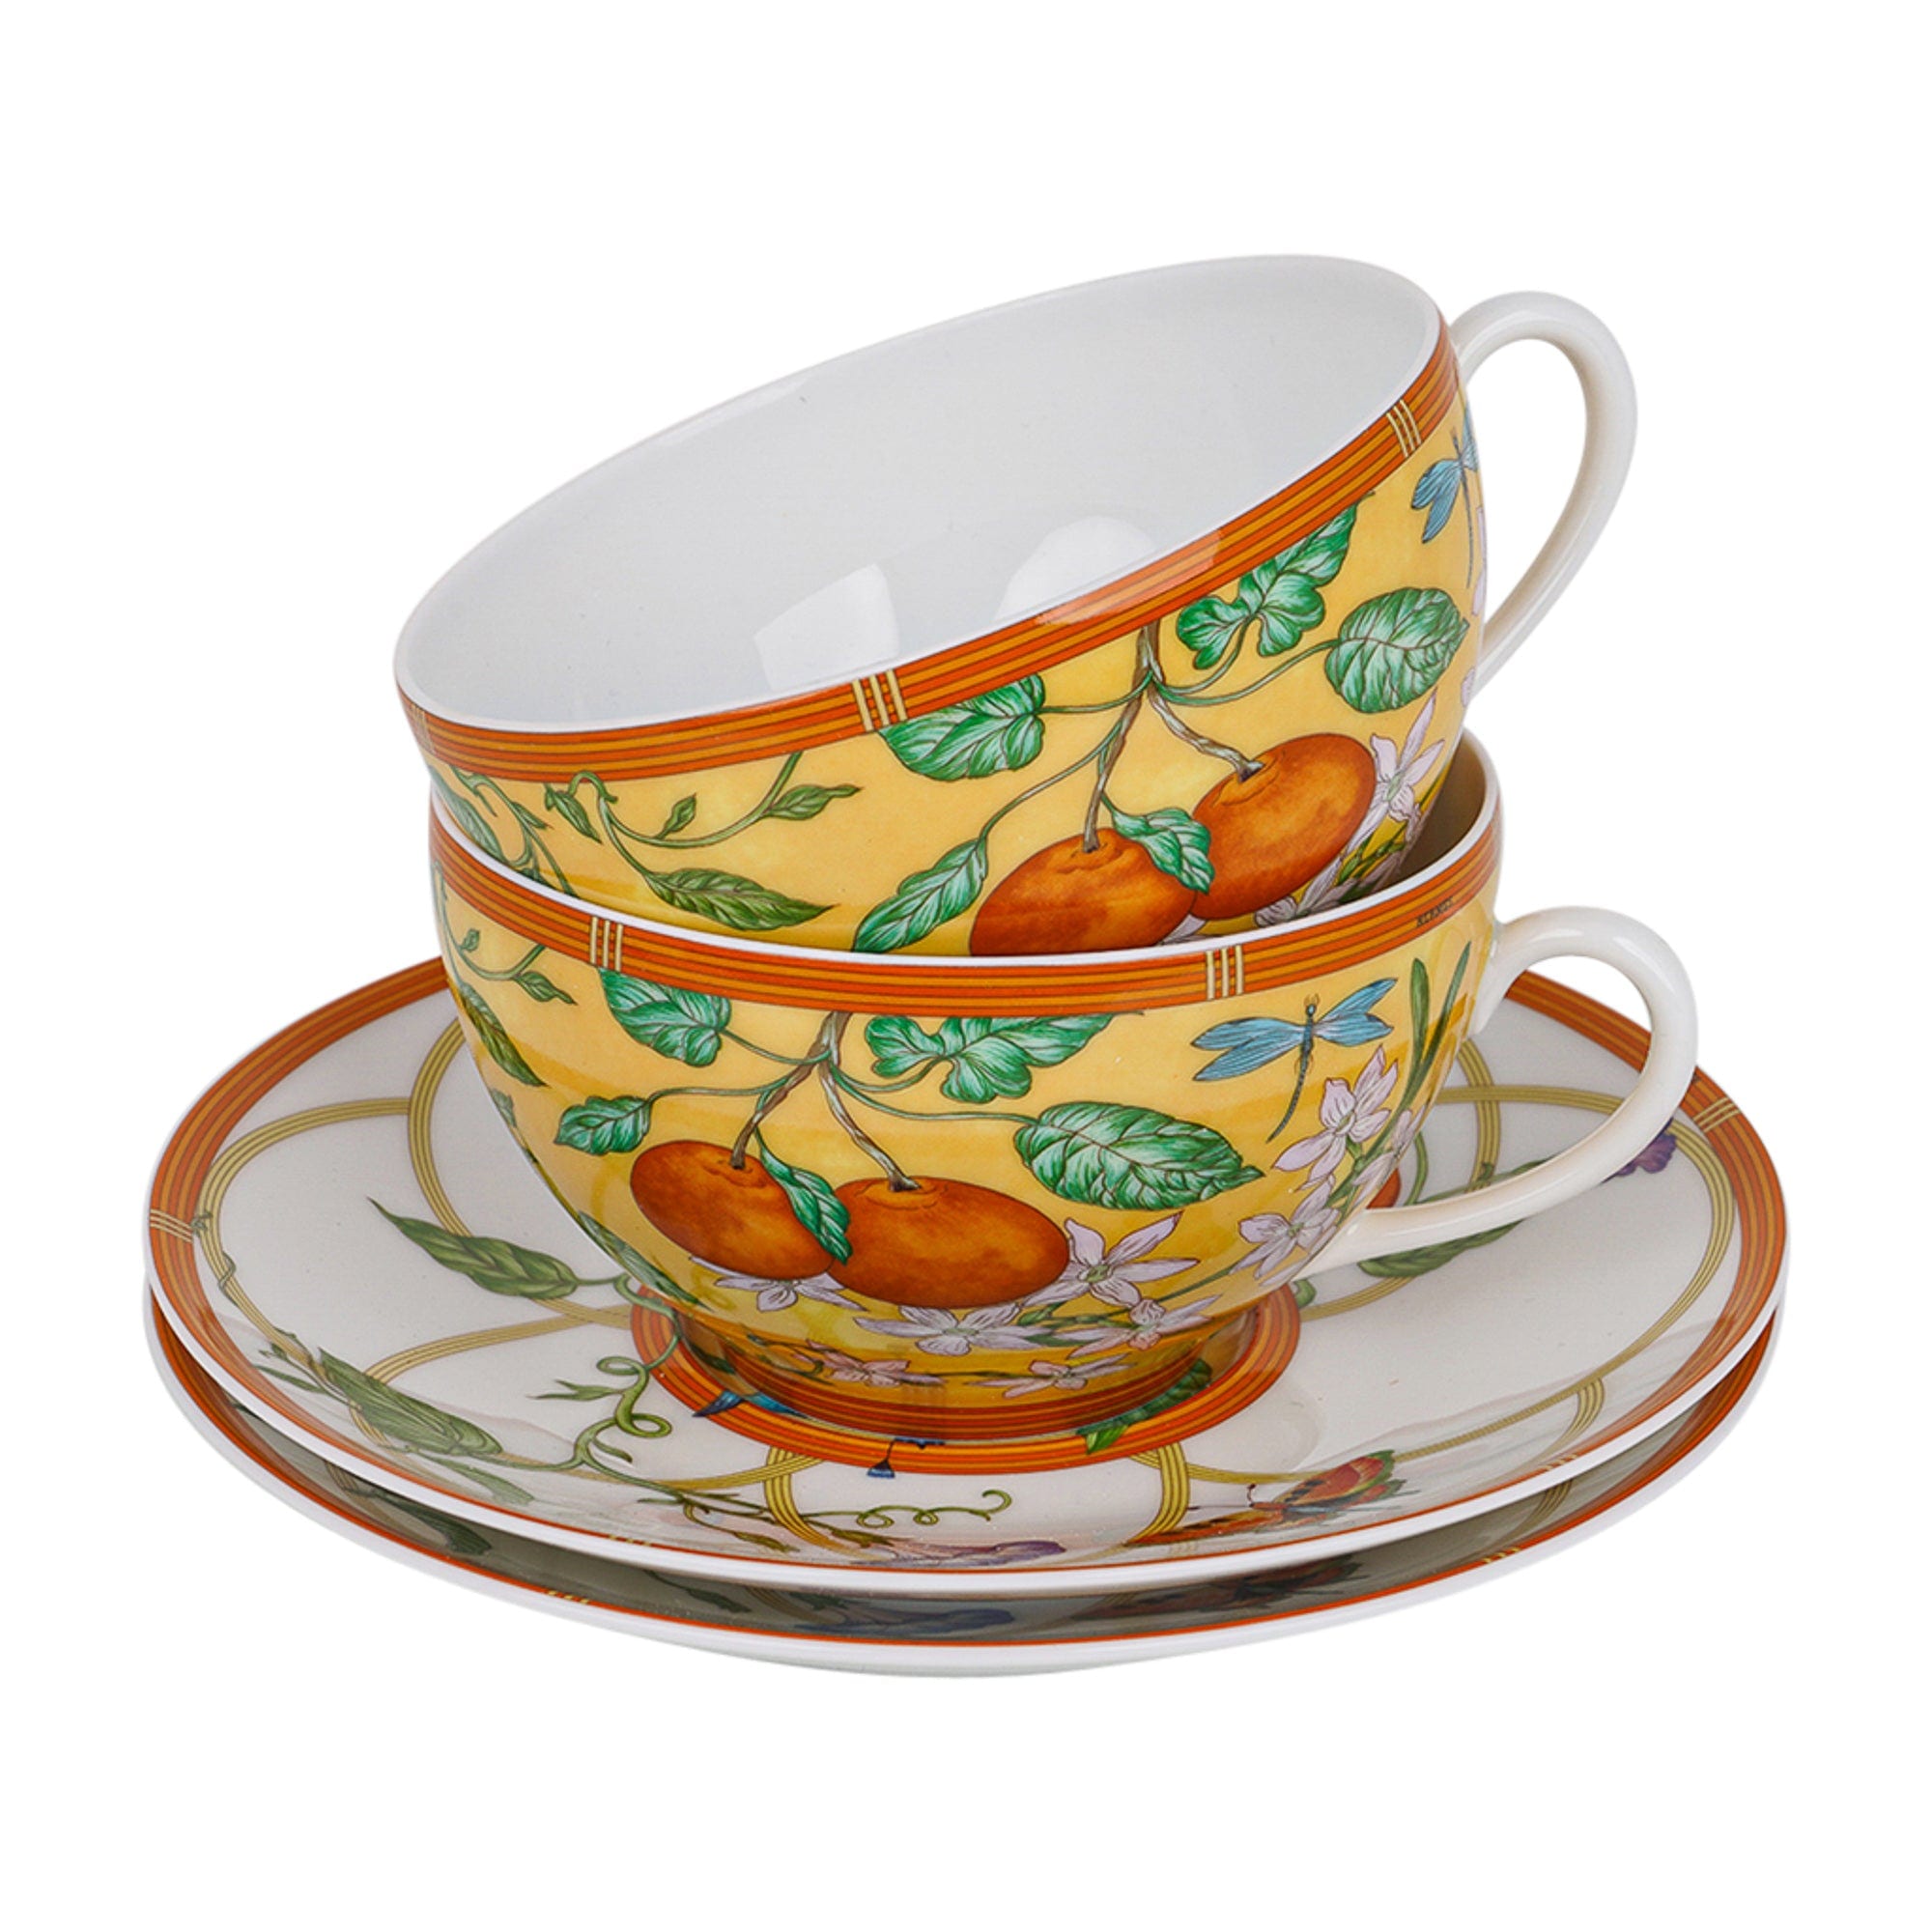 2 x Hermes Porcelain Siesta Chinese Style Tea Cup Saucer Tableware Yellow  w/Box